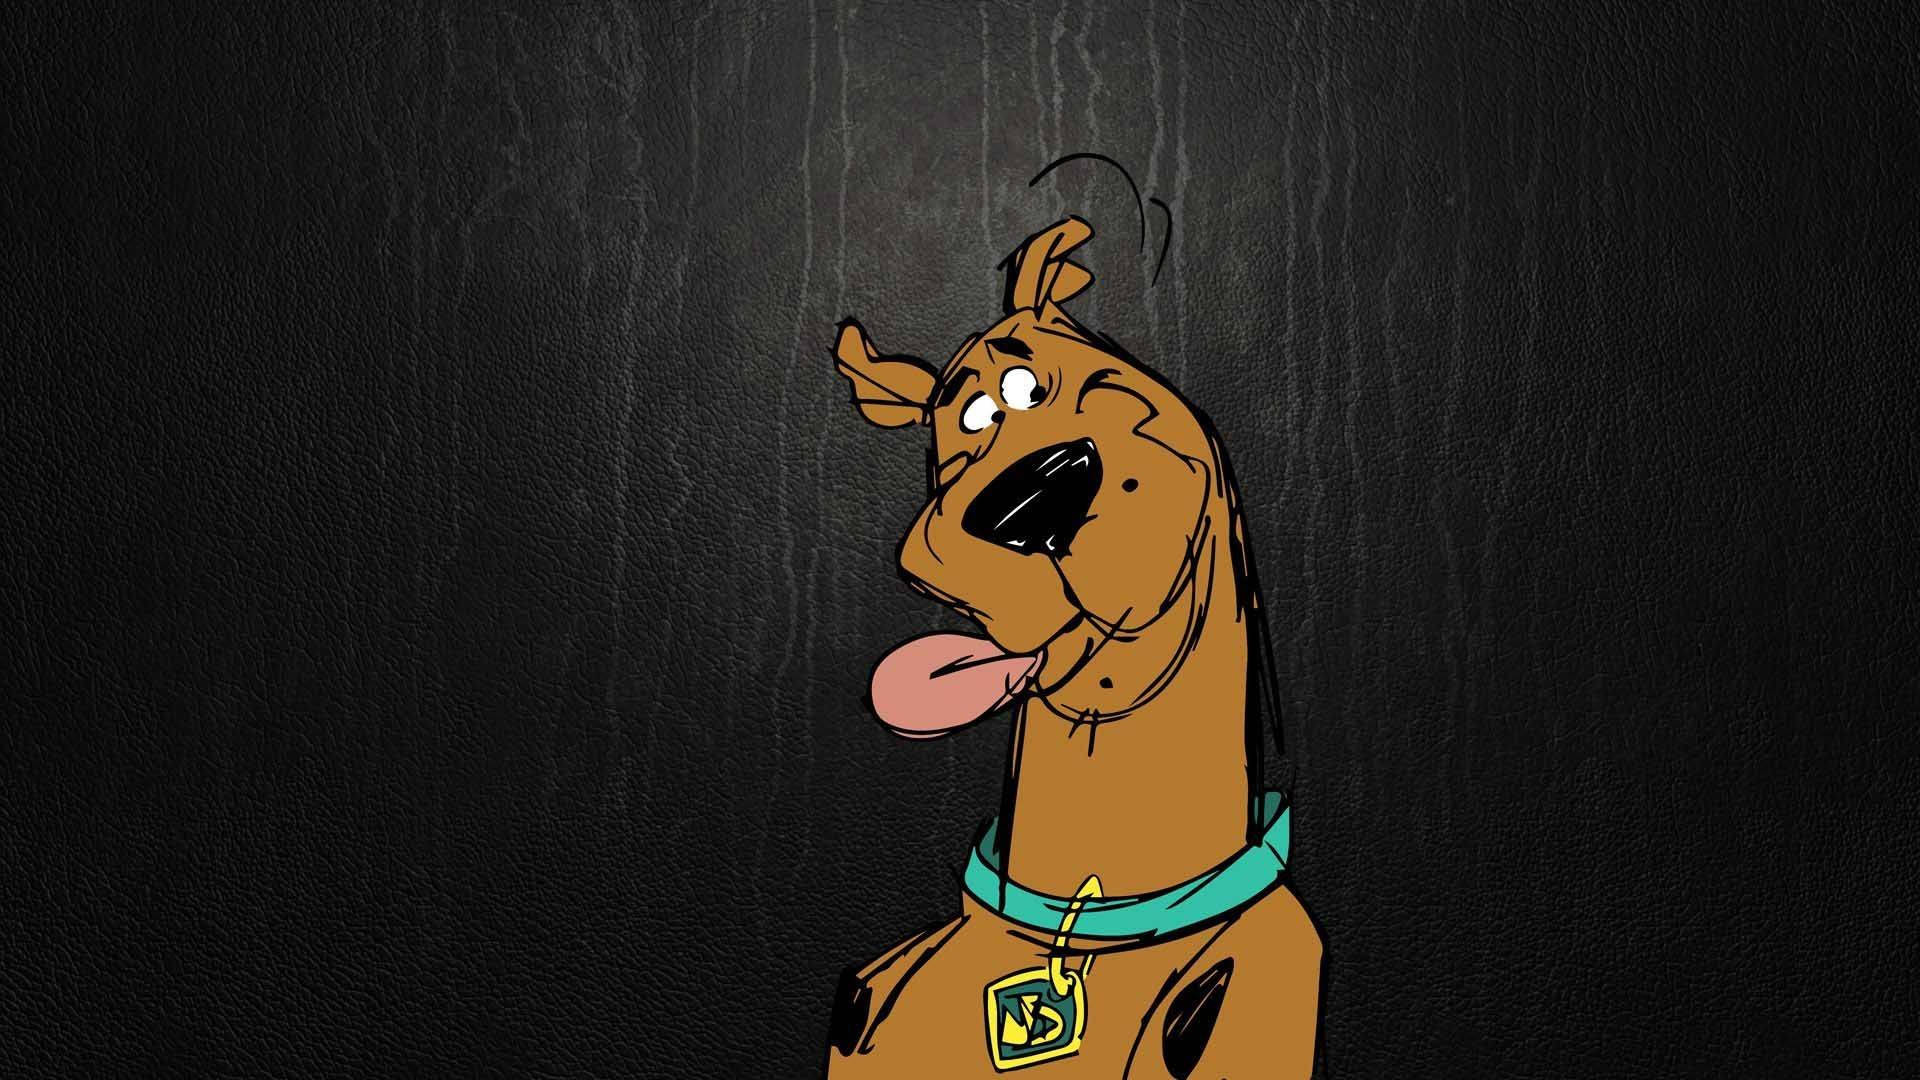 Scooby Doo With Silly Pose Background